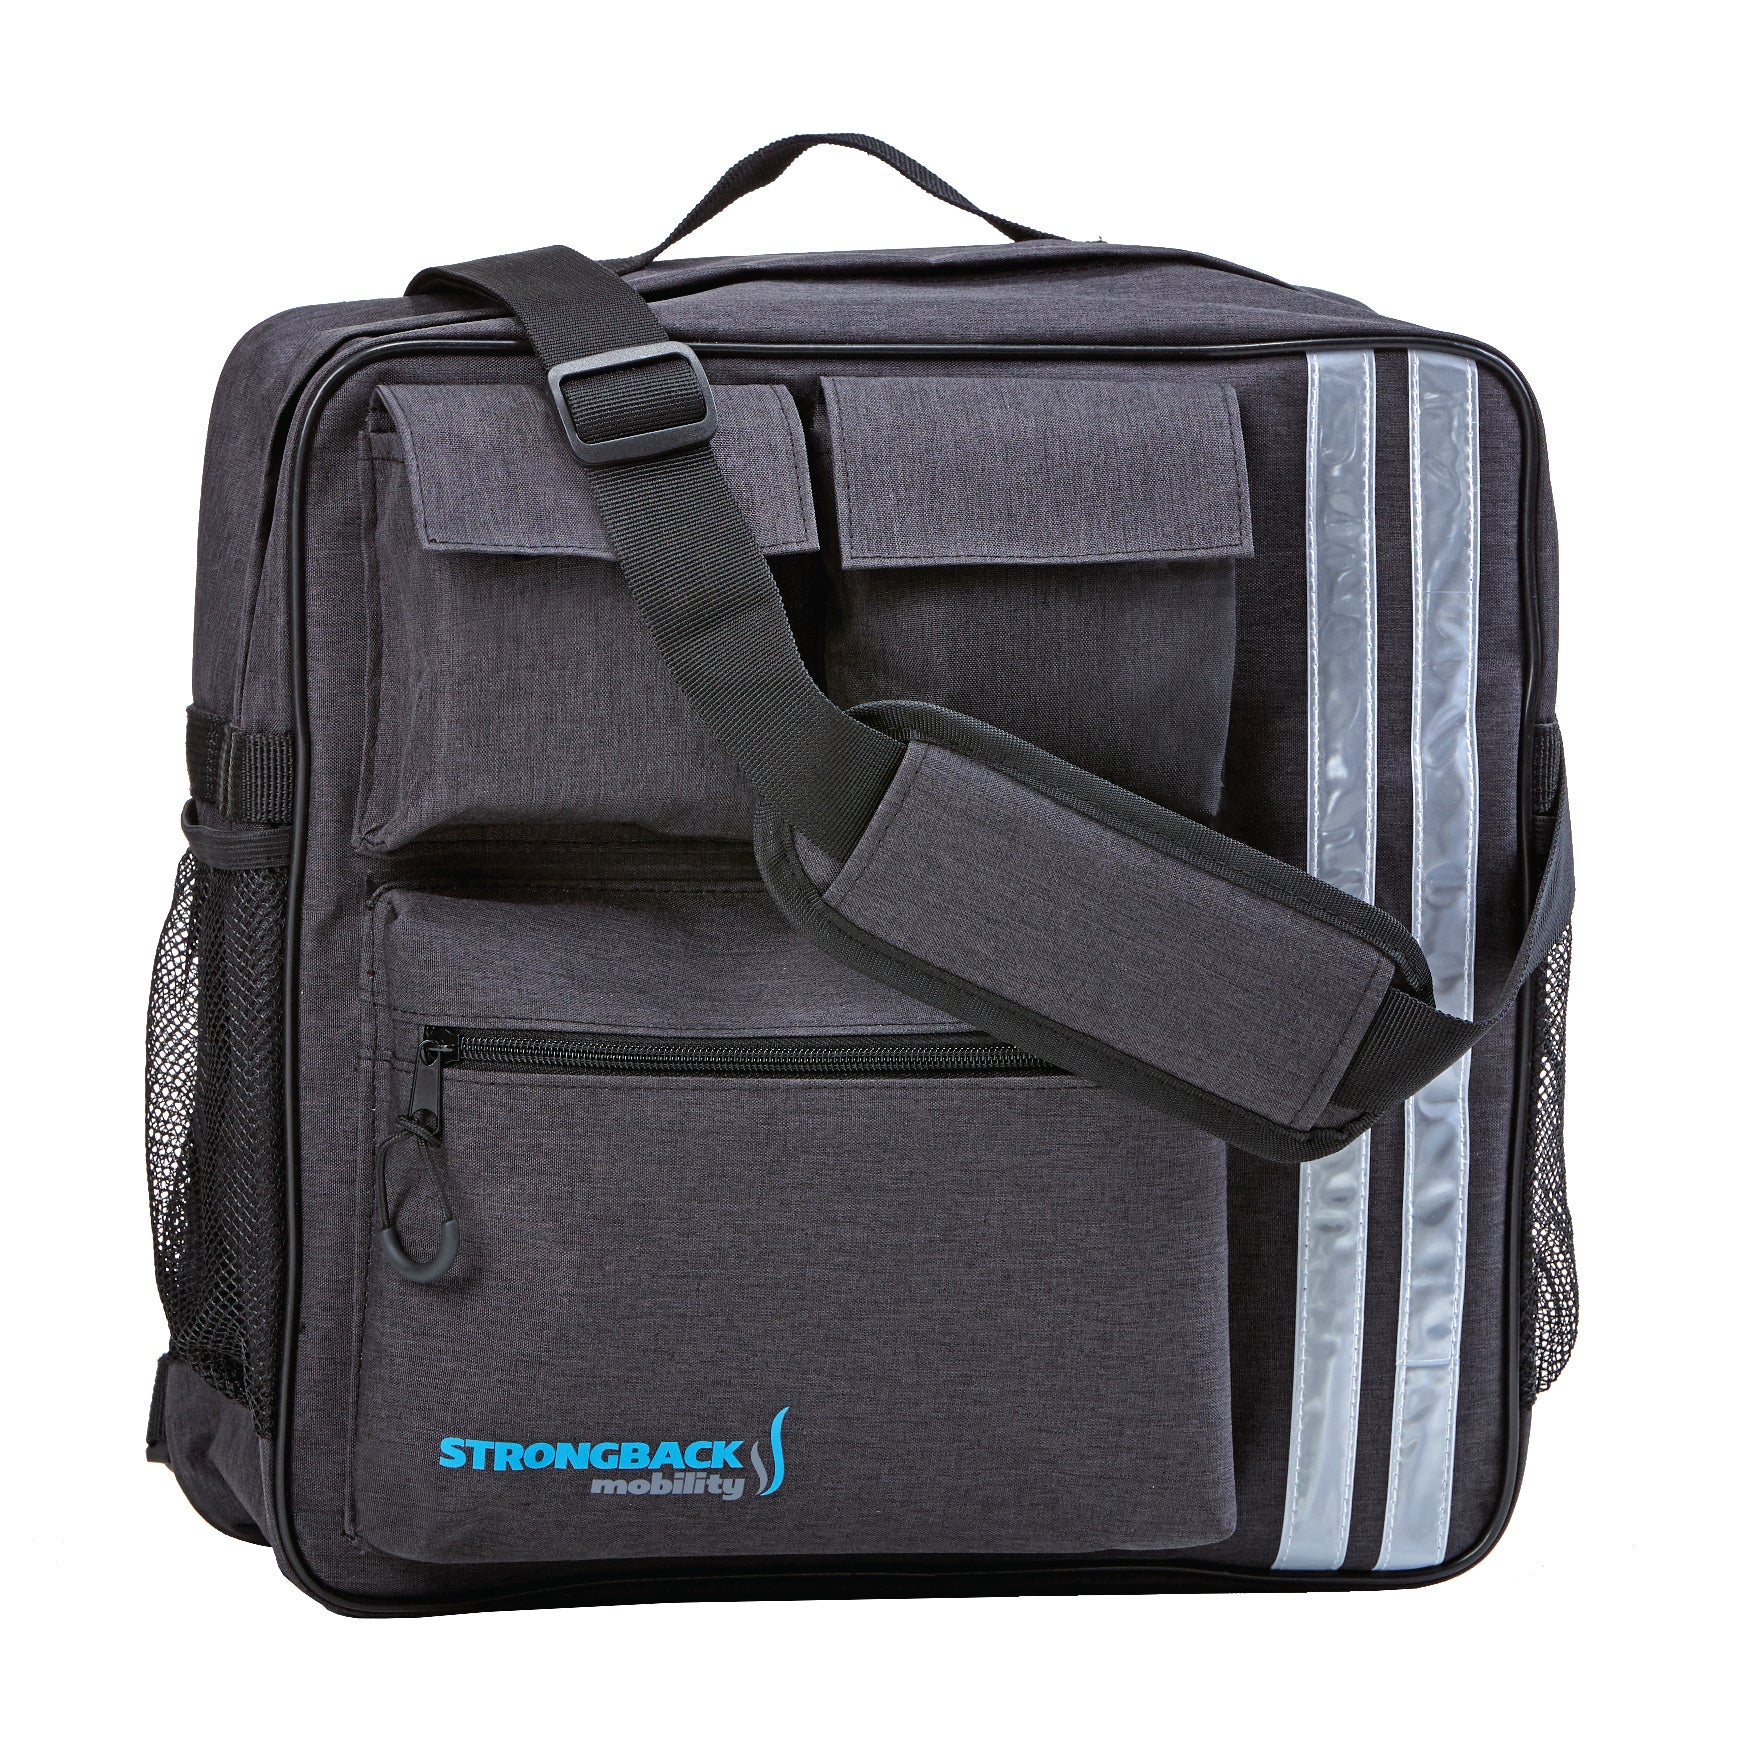 CushPocket is a Quality Wheelchair Bag at an Affordable Price - New Mobility